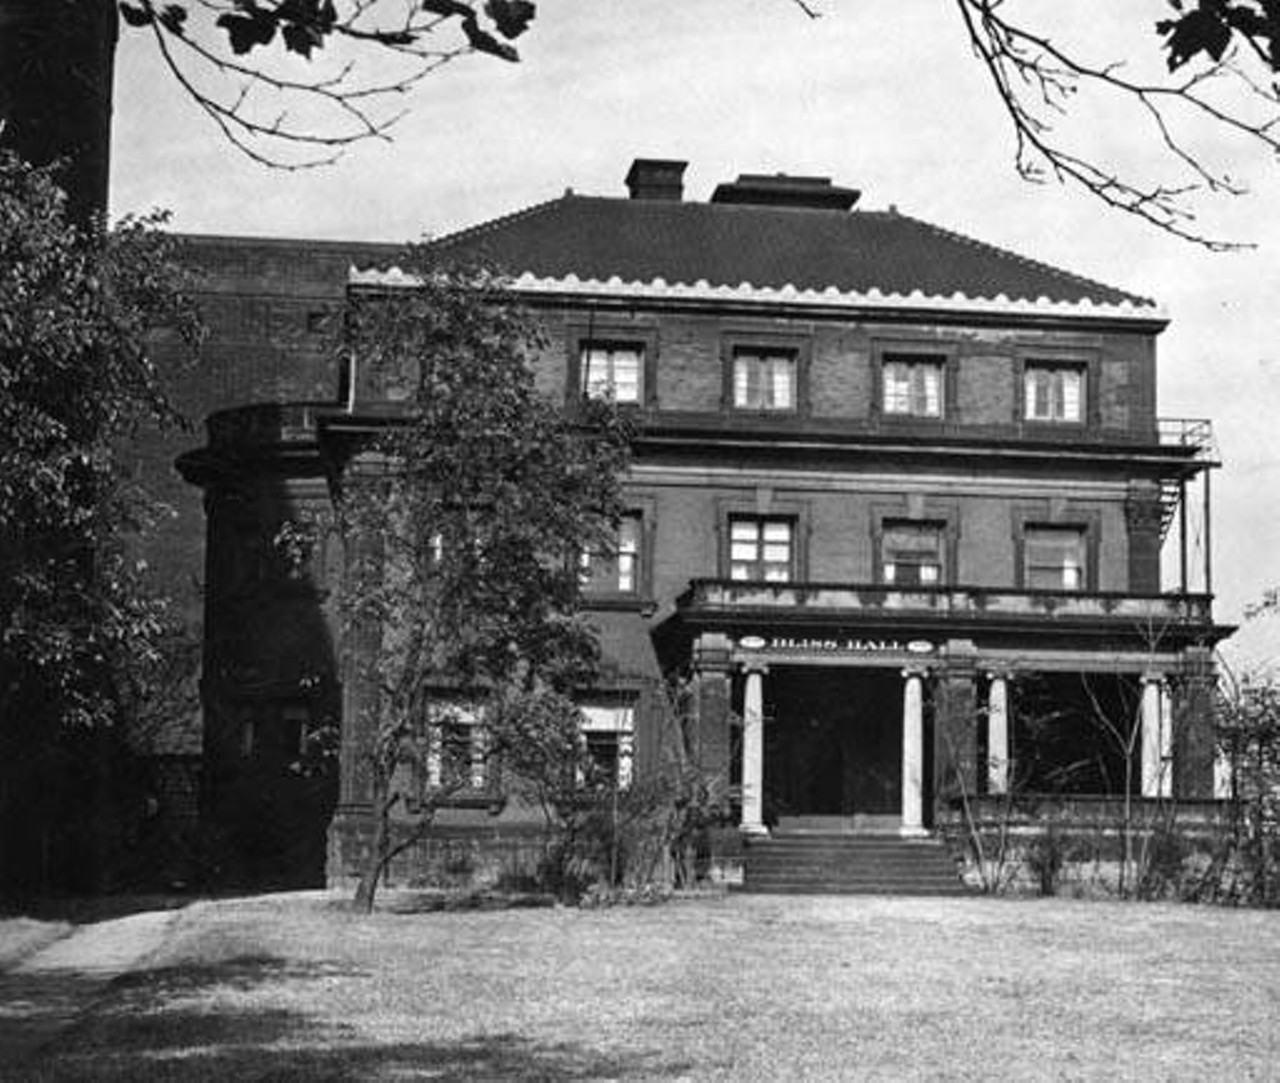 Once part of Millionaires' Row along Euclid Ave., the James Jared Tracy house was renamed Bliss Hall and used as a women's dormitory, 1943-1951.